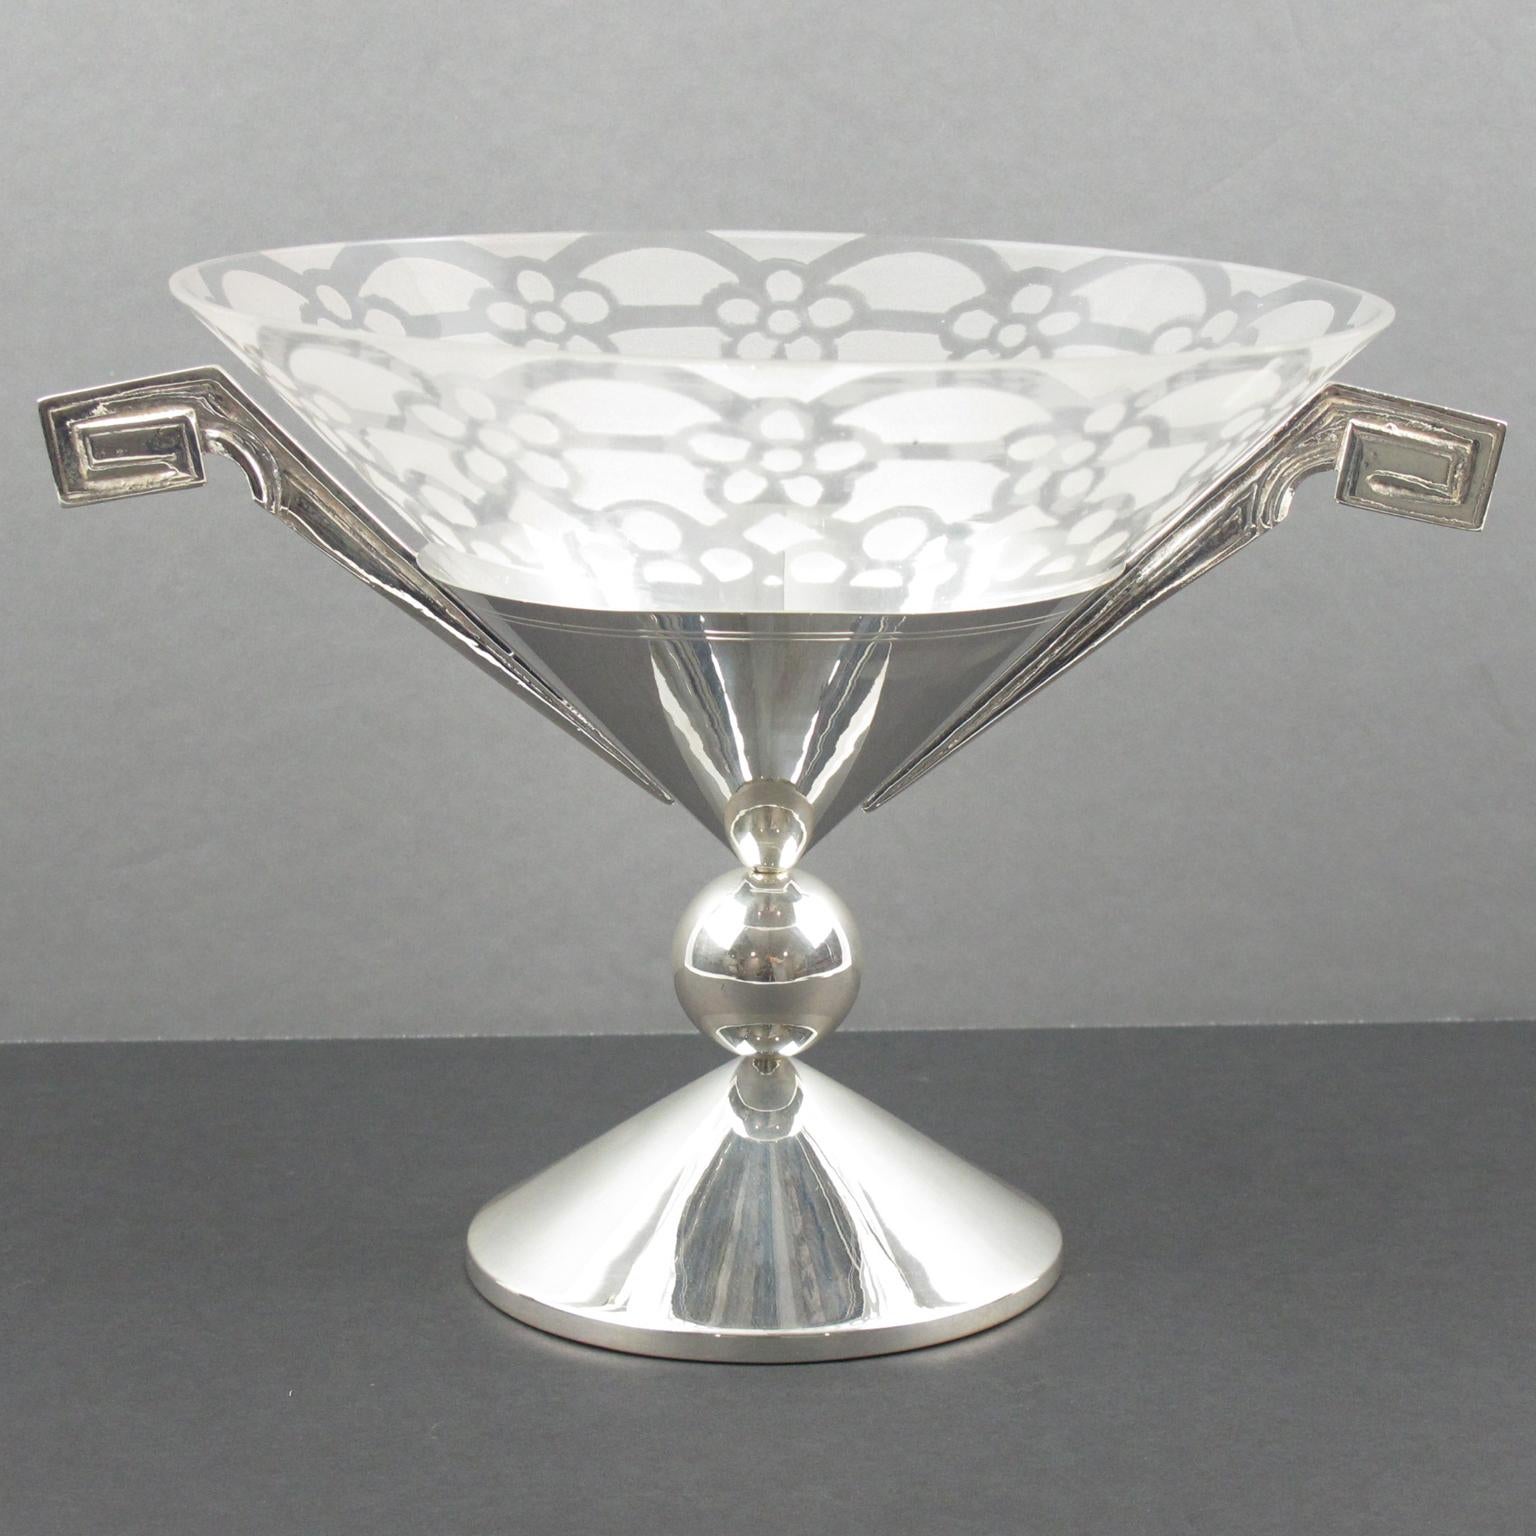 Metal Art Deco Silver Plate and Etched Glass Centerpiece Bowl, France 1930s For Sale